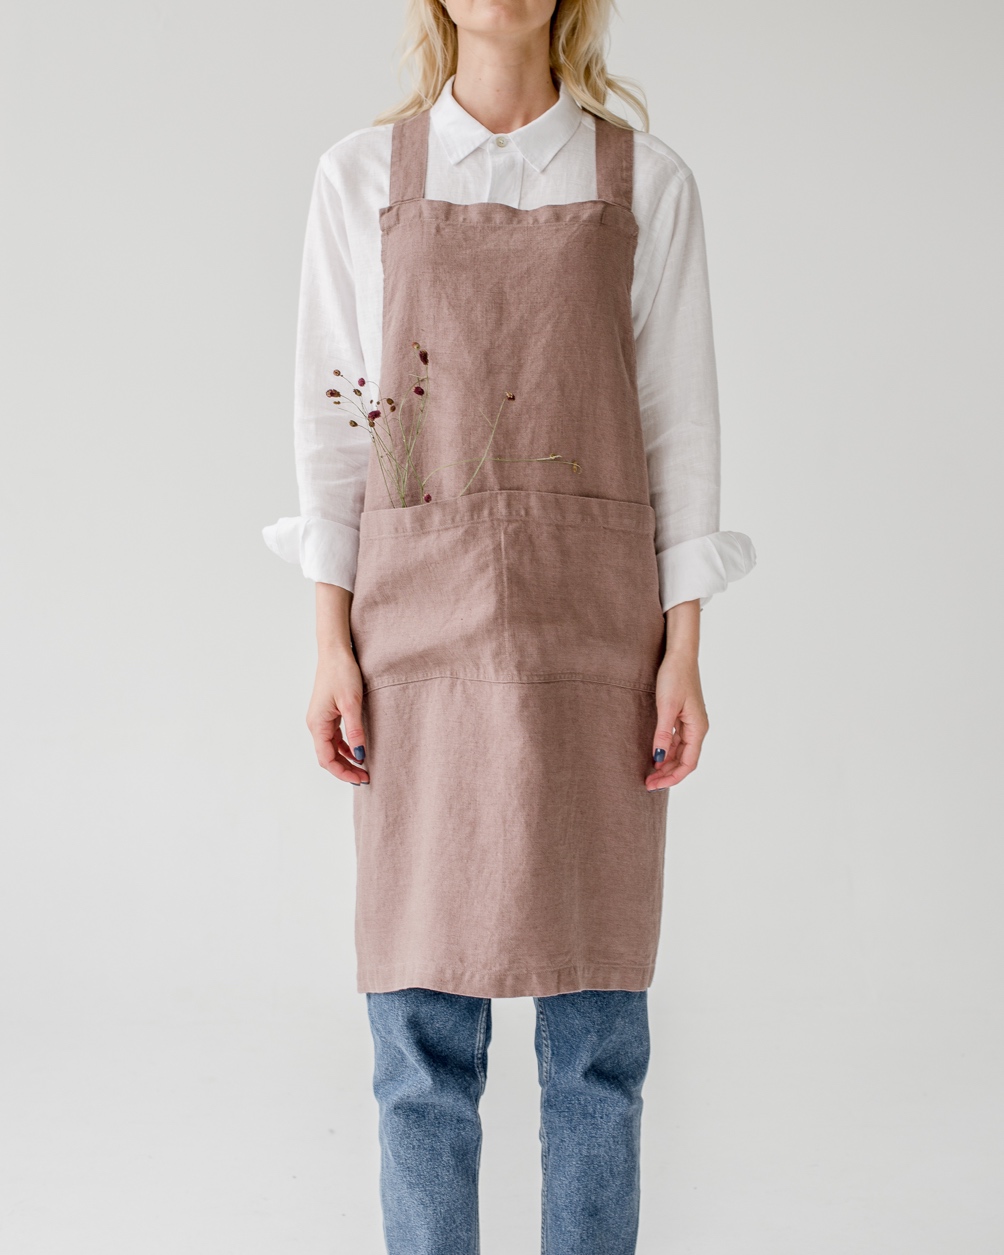 Apron ashes of roses linen Linen Tales